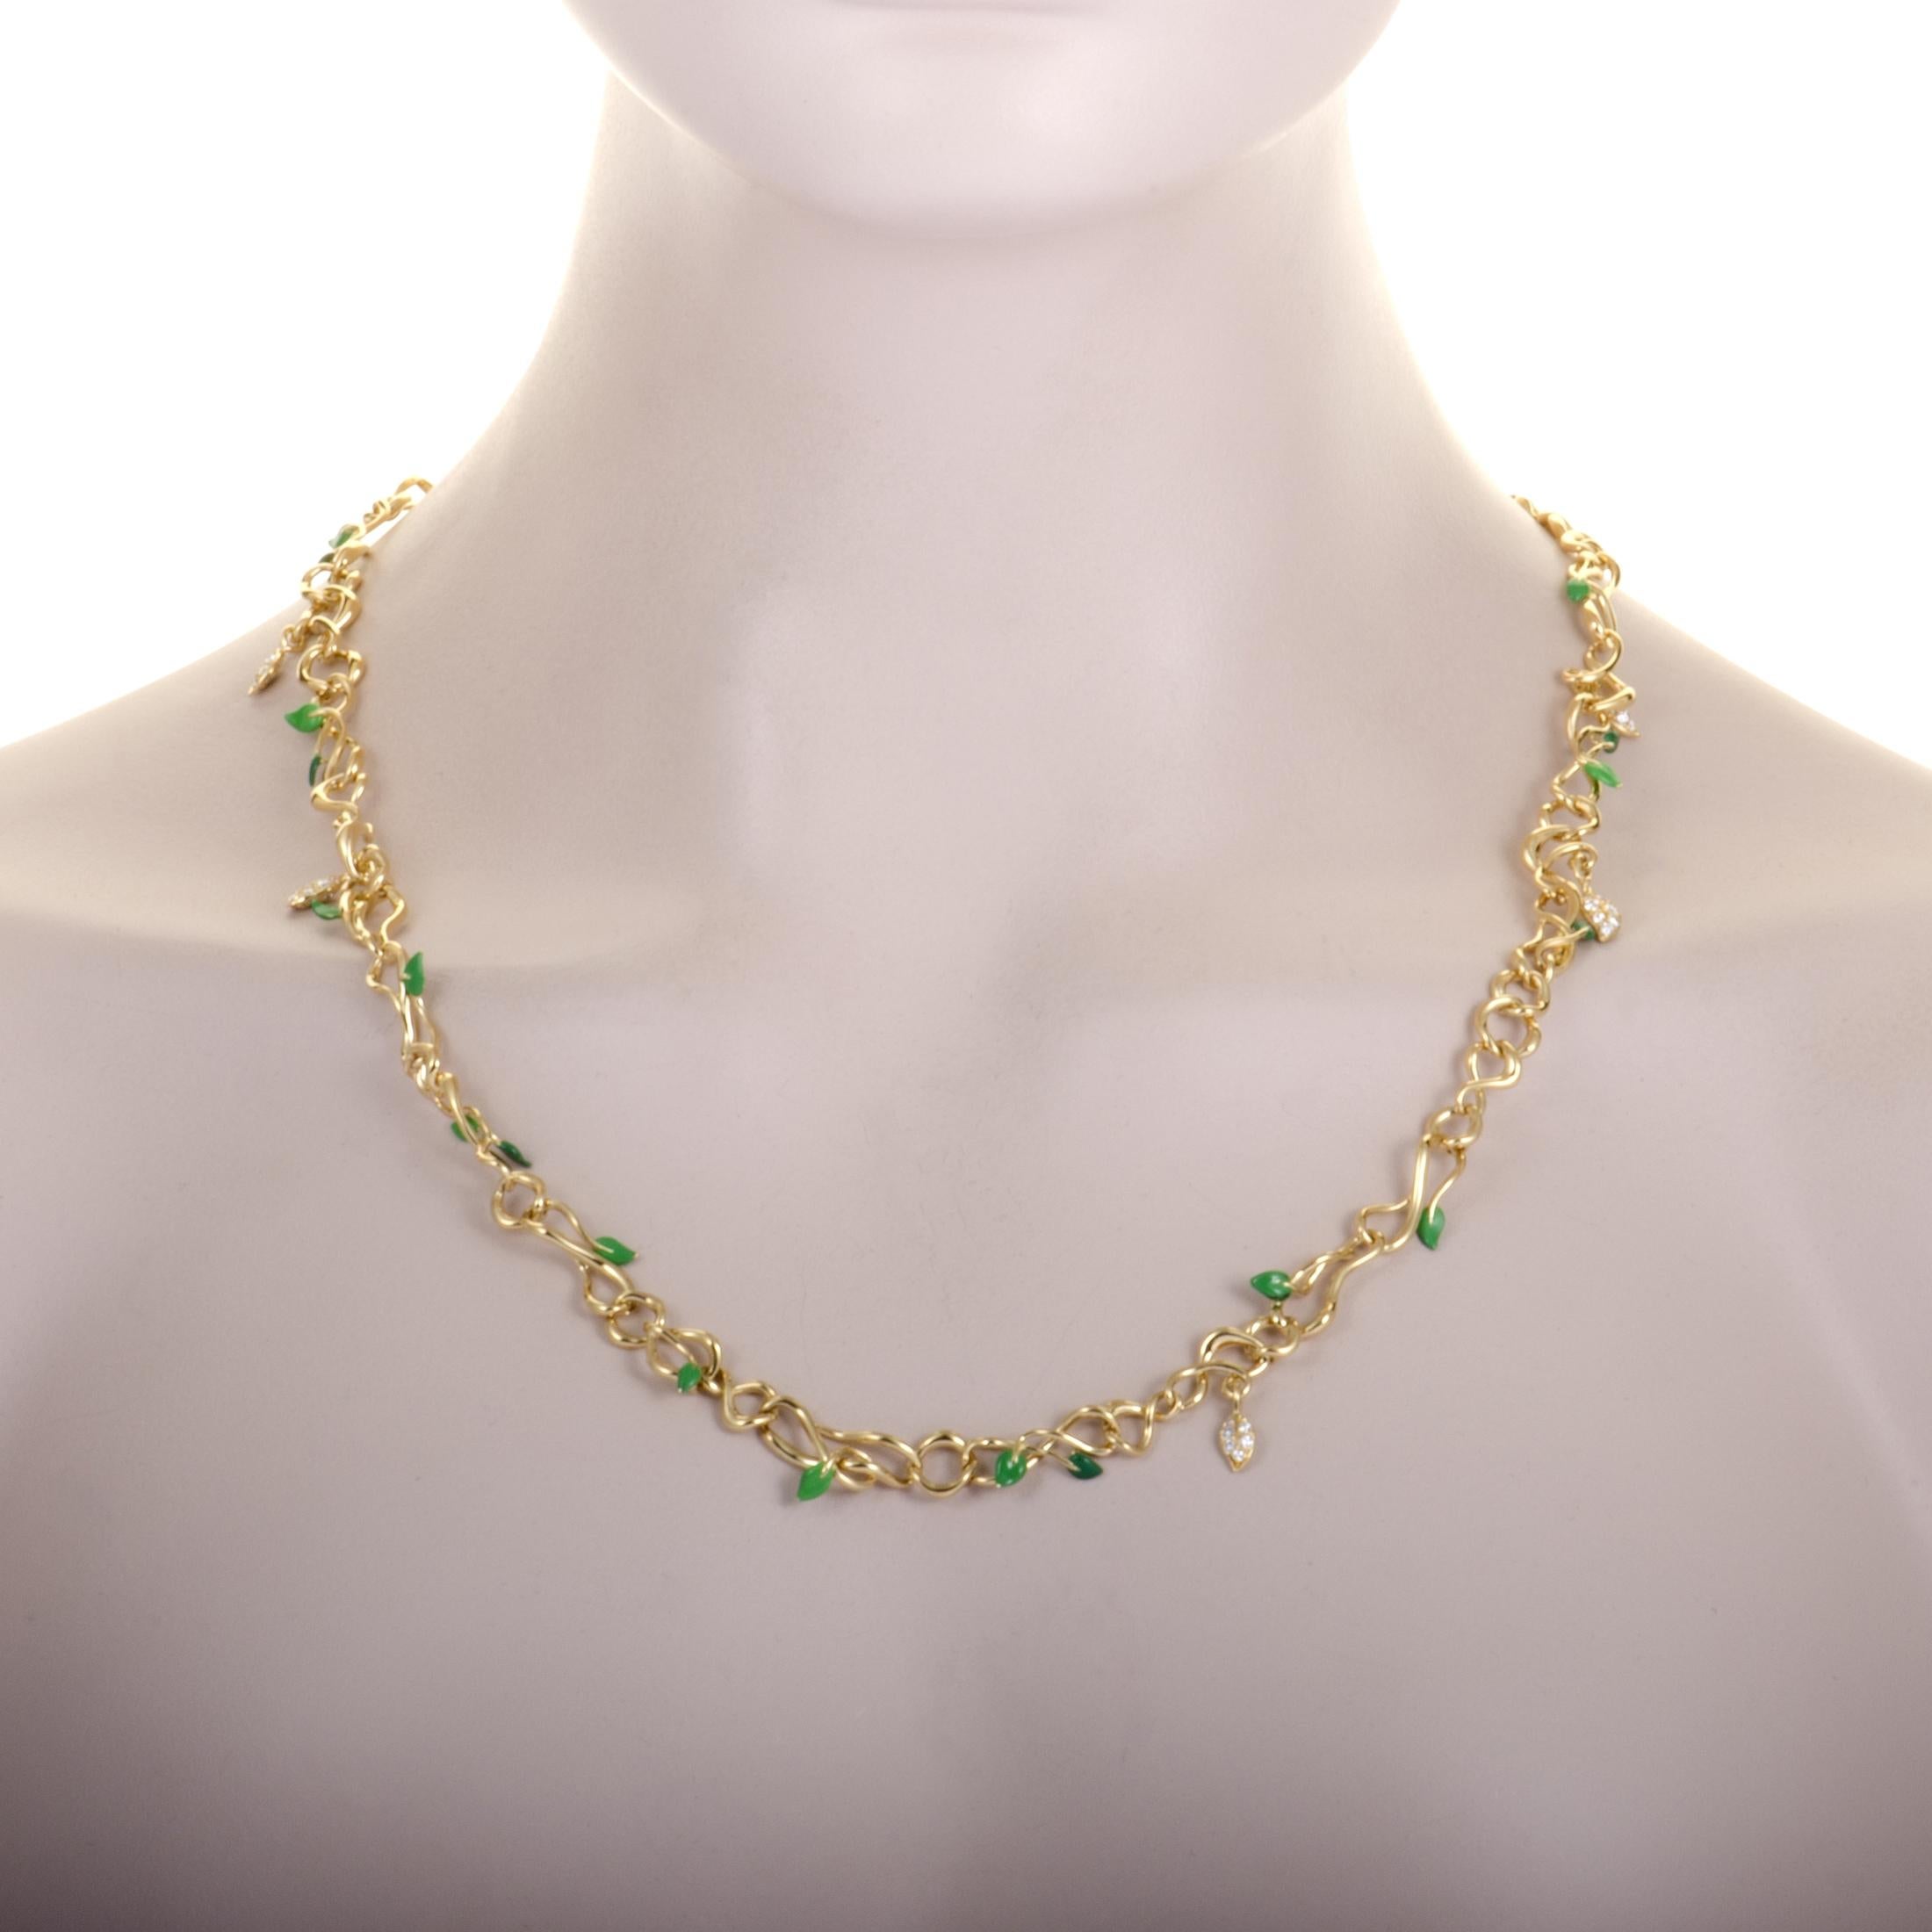 Drawing inspiration from the enticing beauty of nature, this marvelous necklace compels with its imaginative design and vivacious décor. The necklace is presented by Dior and it is exquisitely crafted from luxuriously radiant 18K yellow gold,